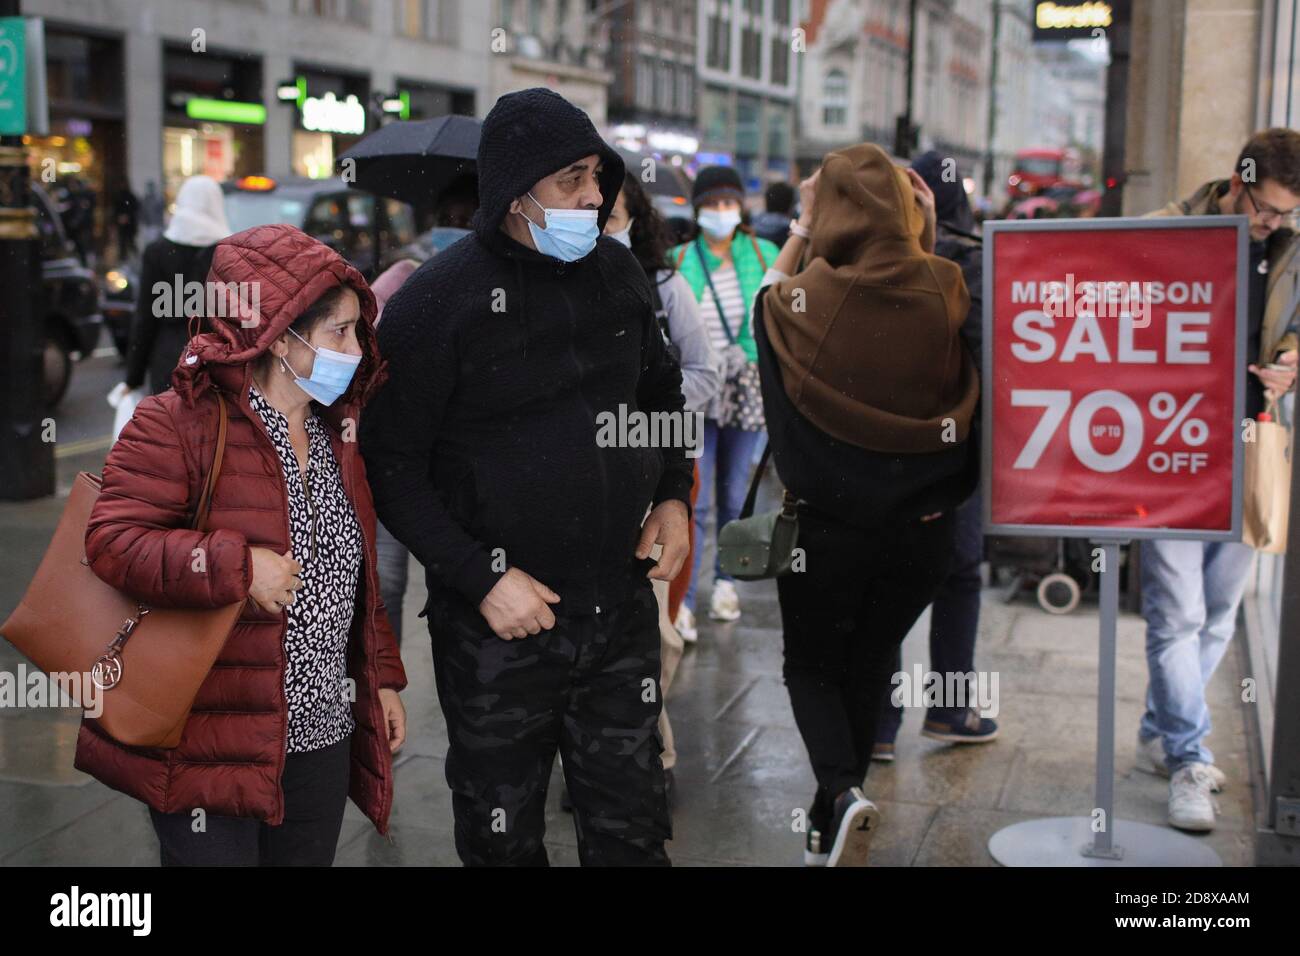 London, Britain. 1st Nov, 2020. Shoppers look in a store window on Oxford Street in London, Britain, on Nov. 1, 2020. British Cabinet Office Minister Michael Gove on Sunday admitted the month-long lockdown, which will be imposed in England on Thursday, could be extended if rates of infection do not fall sufficiently. Gove made the statement after British Prime Minister Boris Johnson announced the new restrictions, which are set to last until Dec. 2, at a press conference from Downing Street on Saturday. Credit: Tim Ireland/Xinhua/Alamy Live News Stock Photo